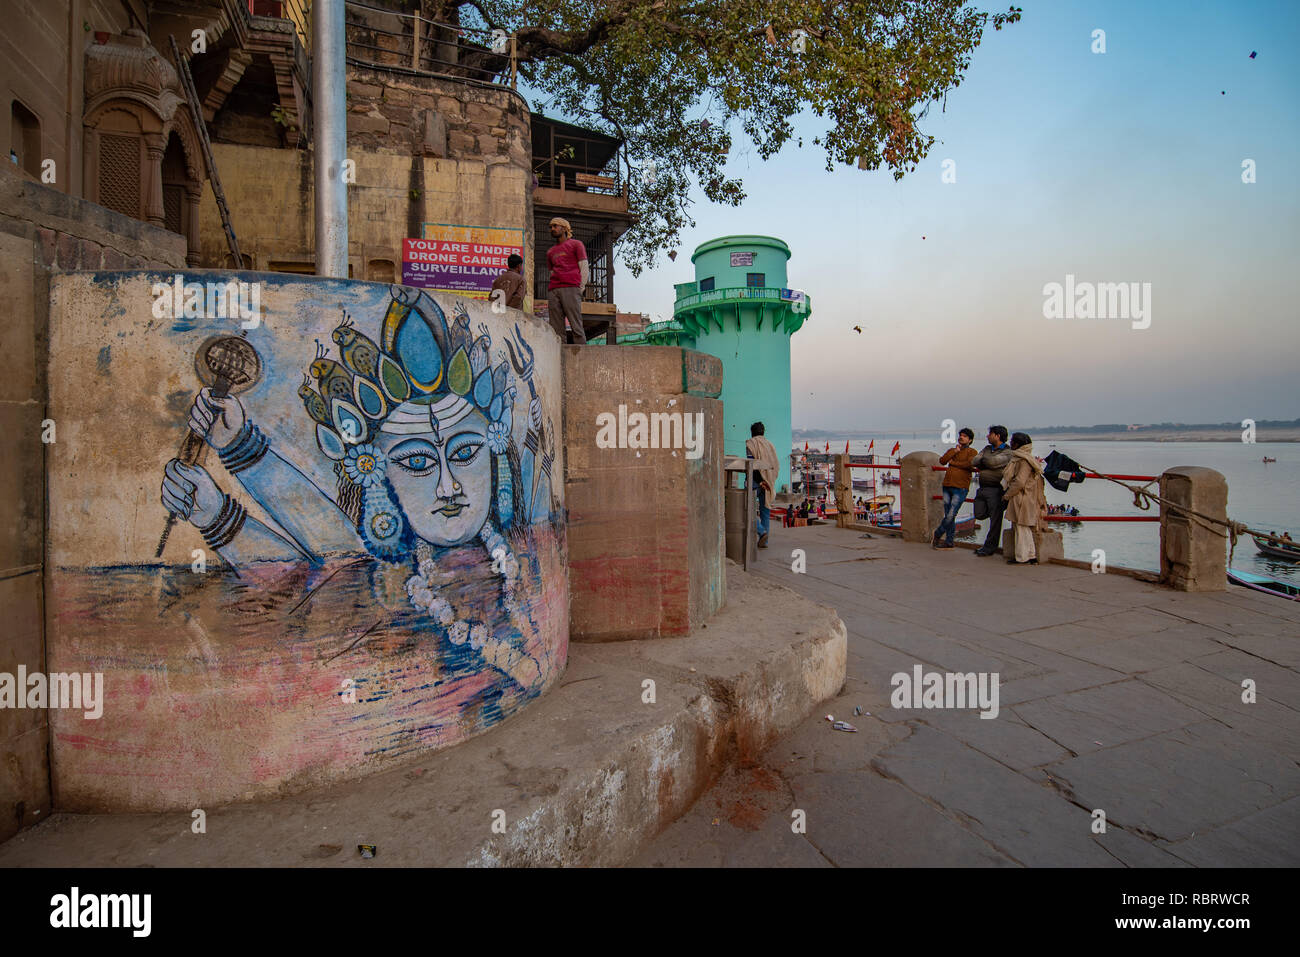 Mural of a Shiva the Hindu god in Varanasi, India with the Ganges in the background. Stock Photo